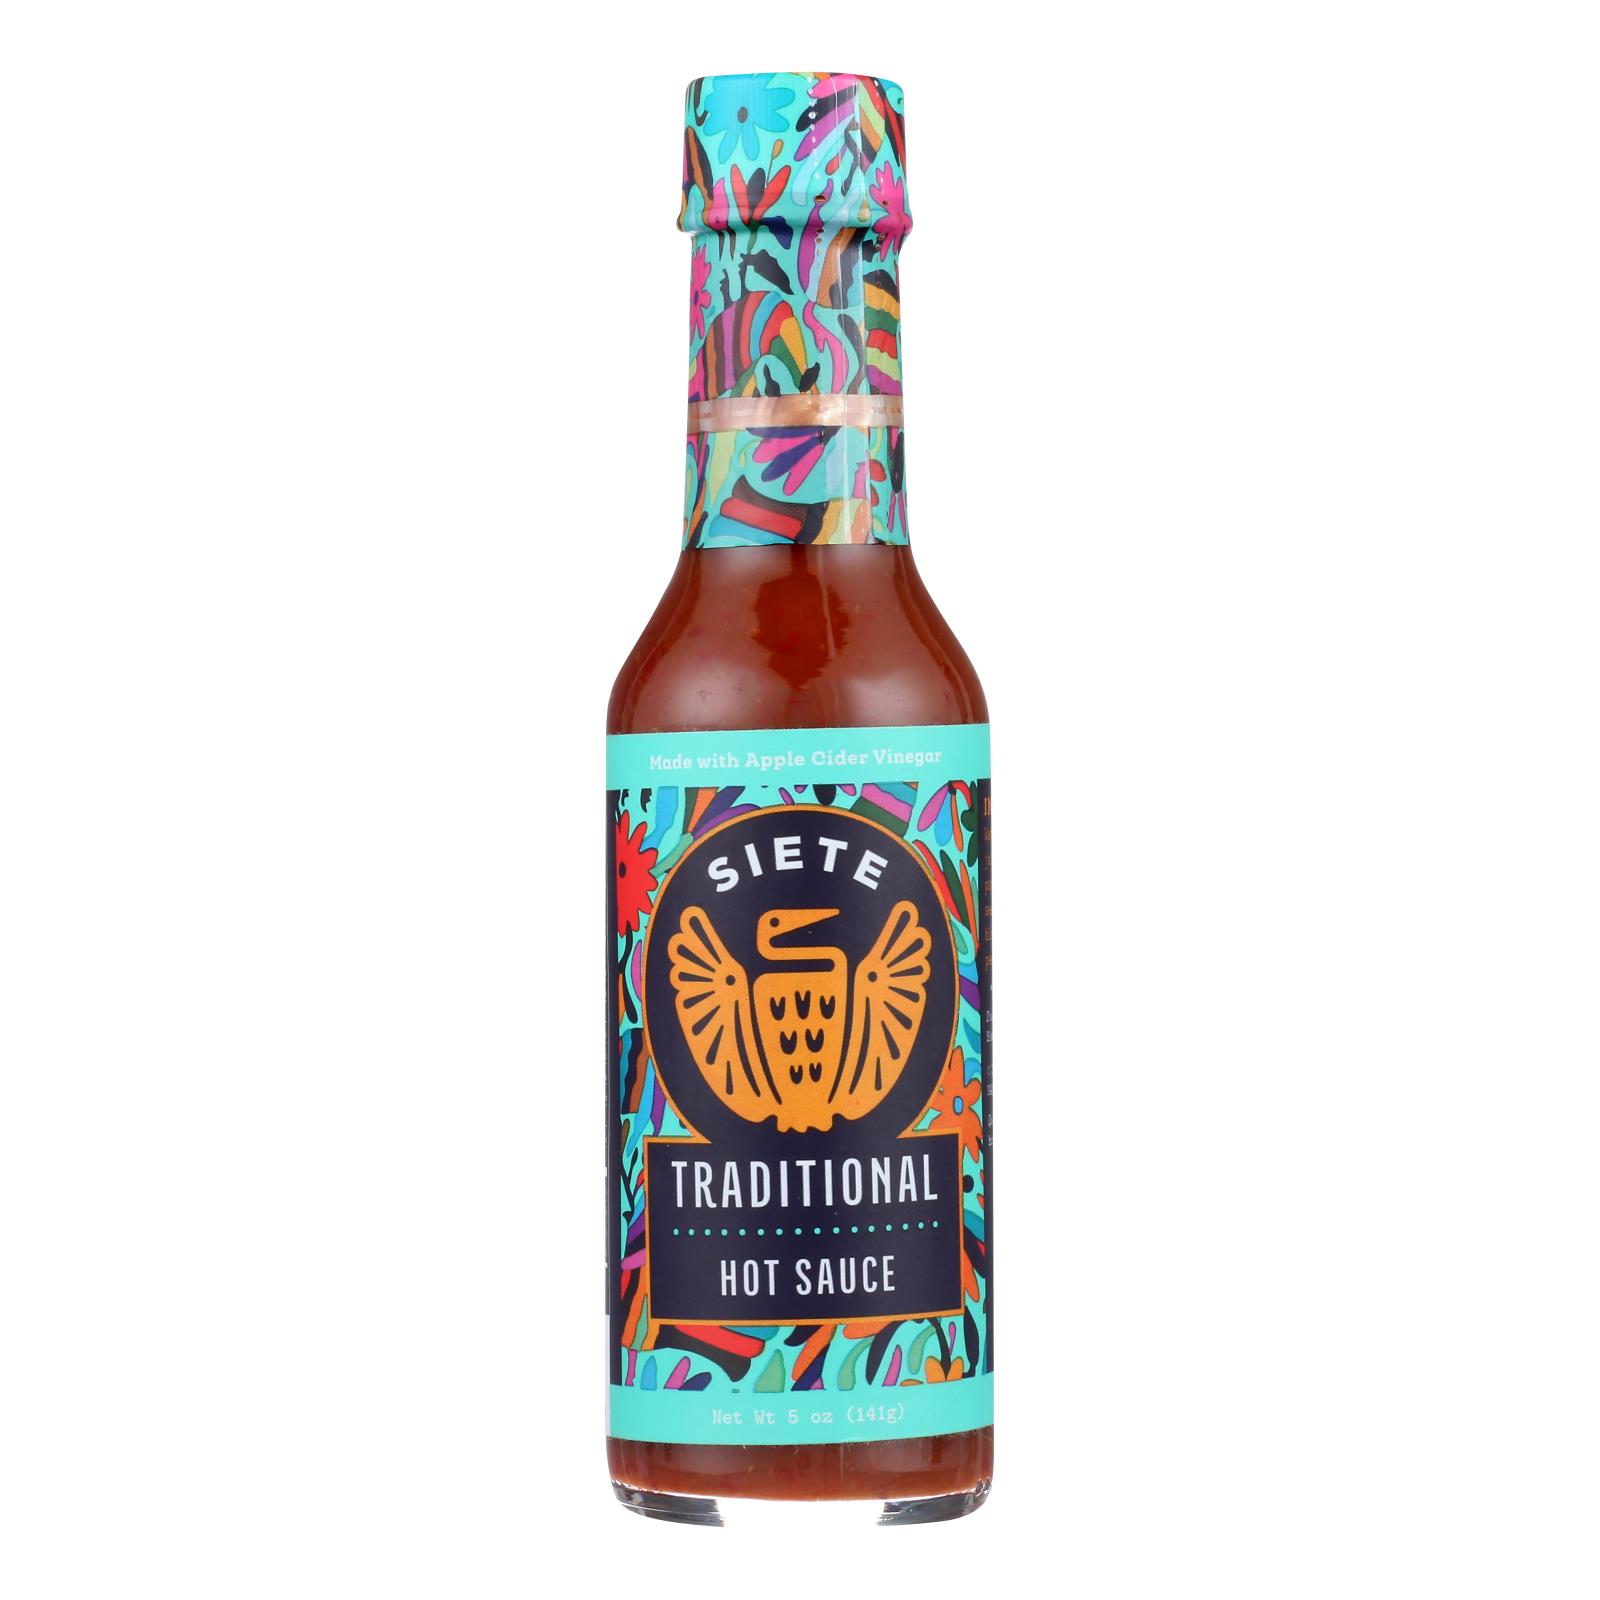 Siete - Hot Sauce Traditional - Case of 6 - 5 OZ